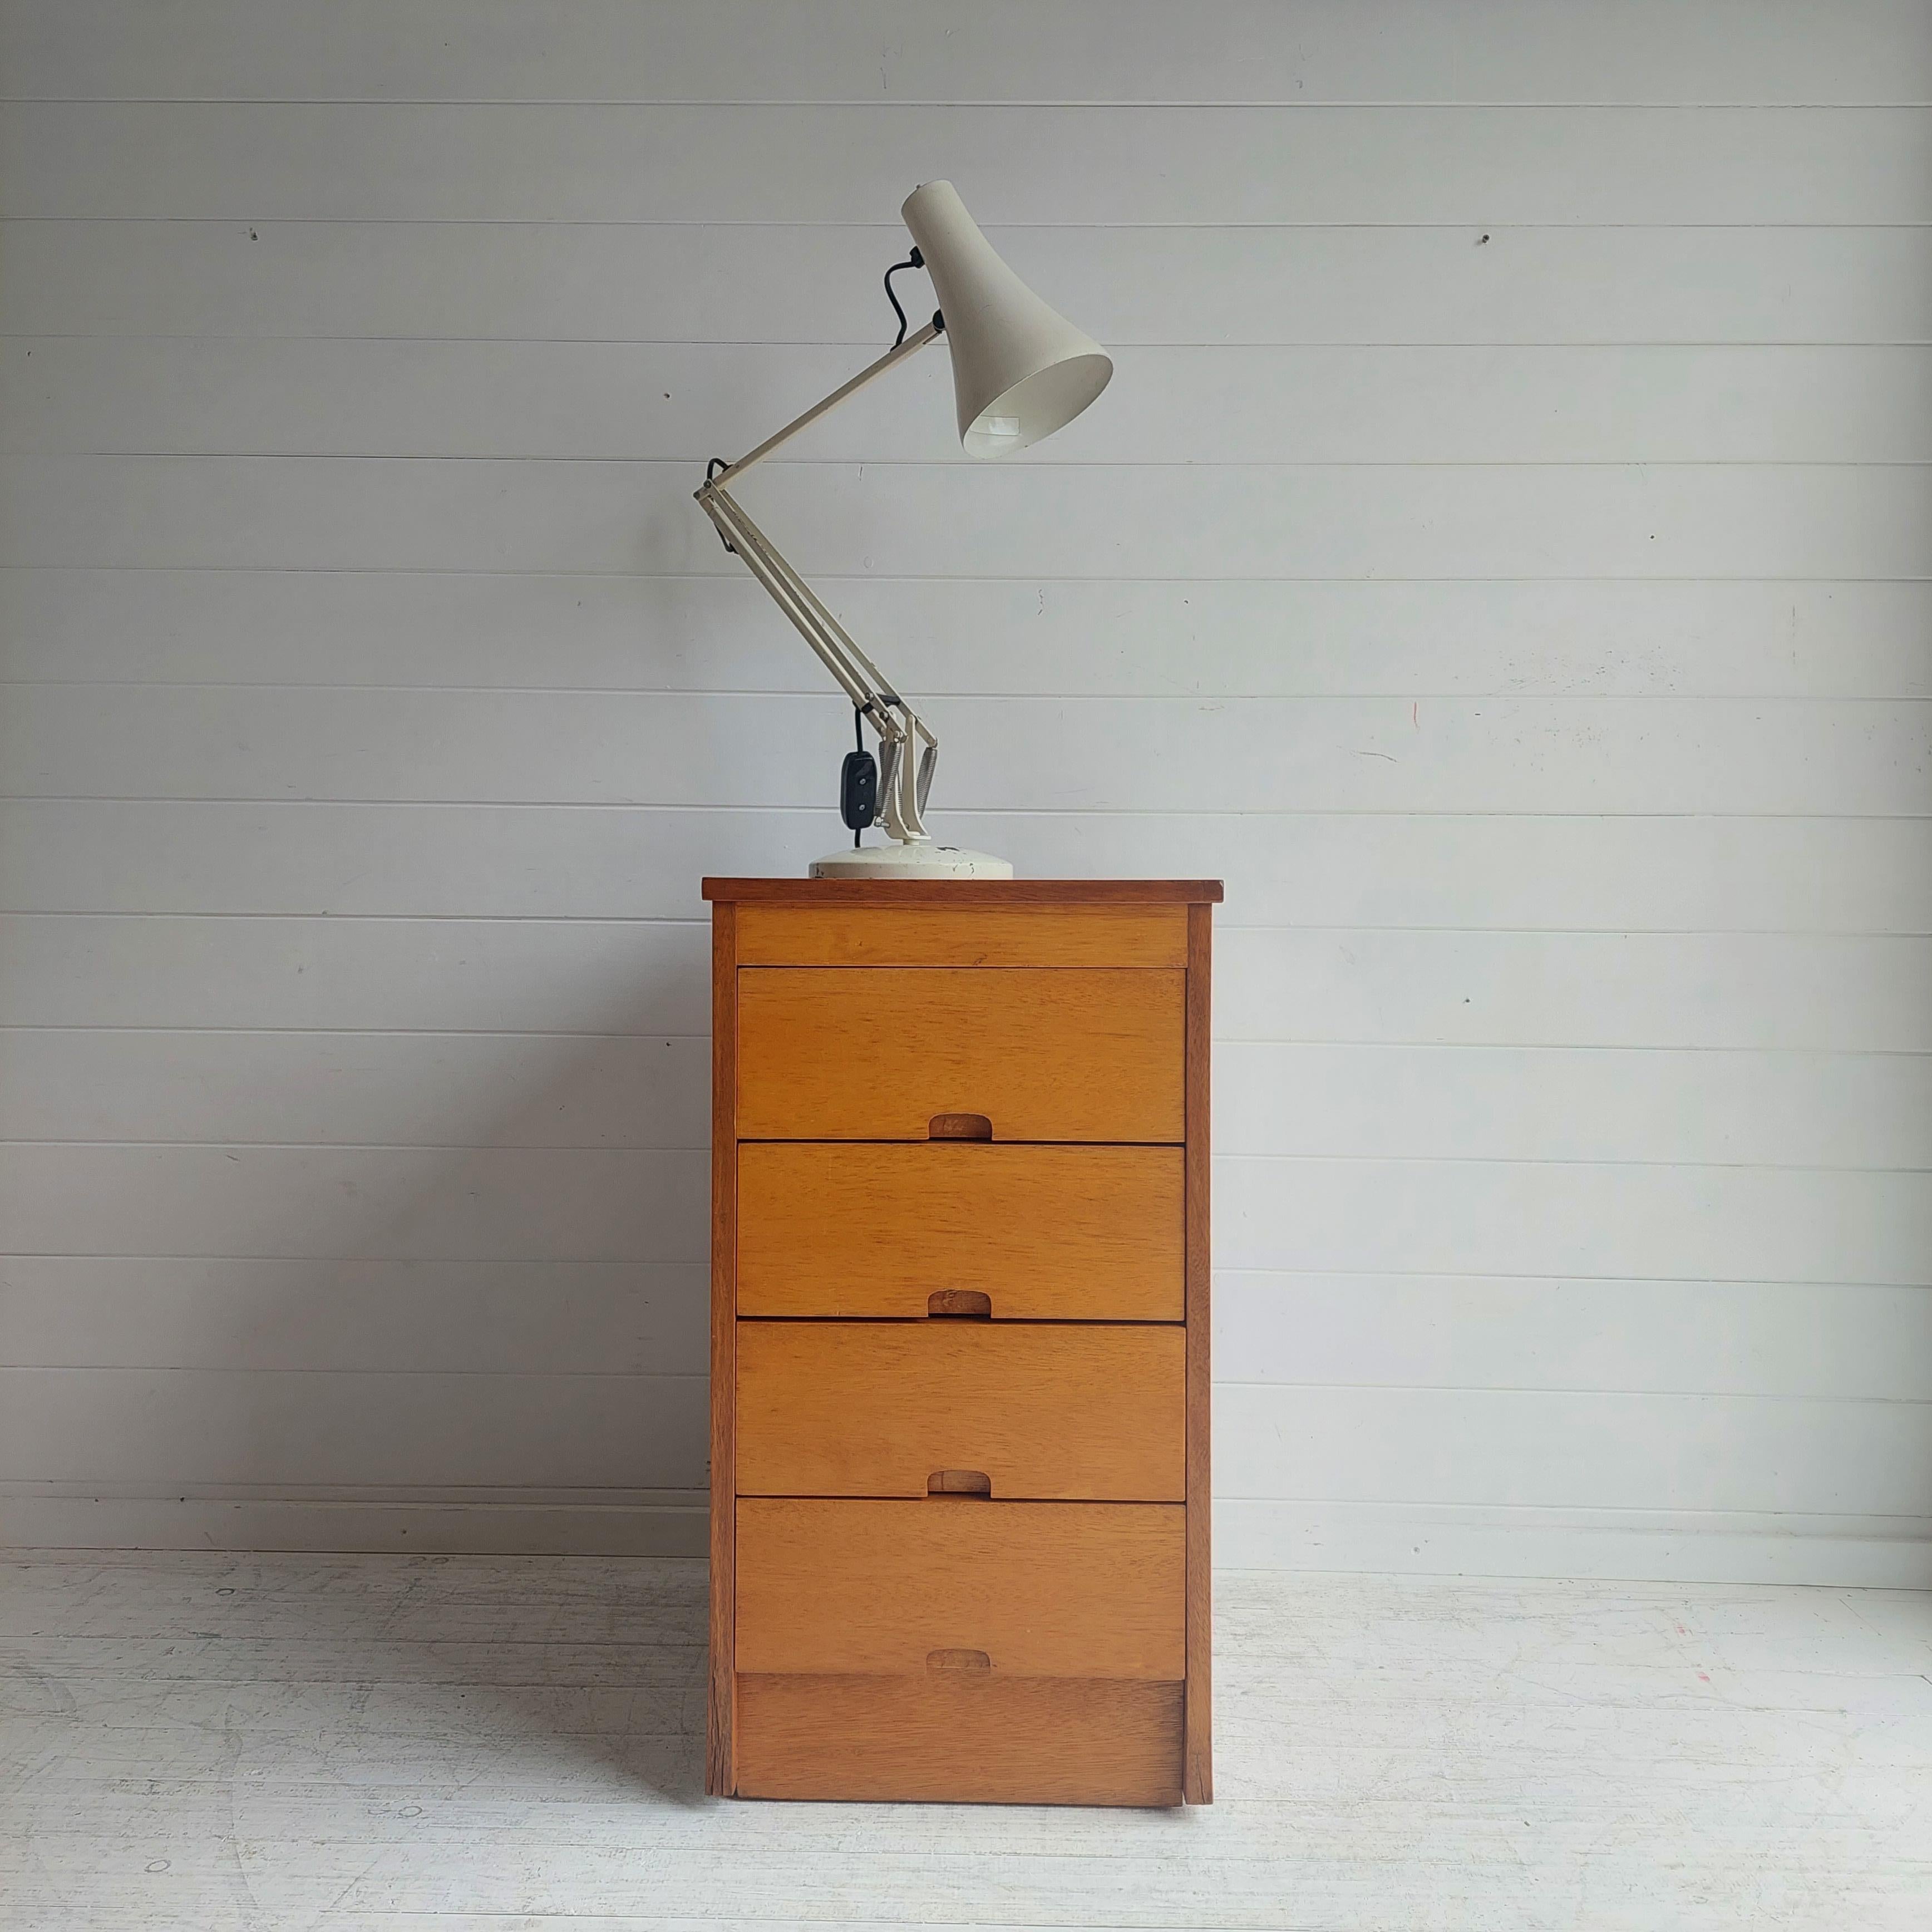 Great Mid Century Modern chest of drawers.

Mid-century, Scandinavian chest of drawers or storage unit  which looks very similar in style of those designed by Milo Baughman for Drexel.

Gorgeous mix of contrasting use of woods. 
Case made of walnut